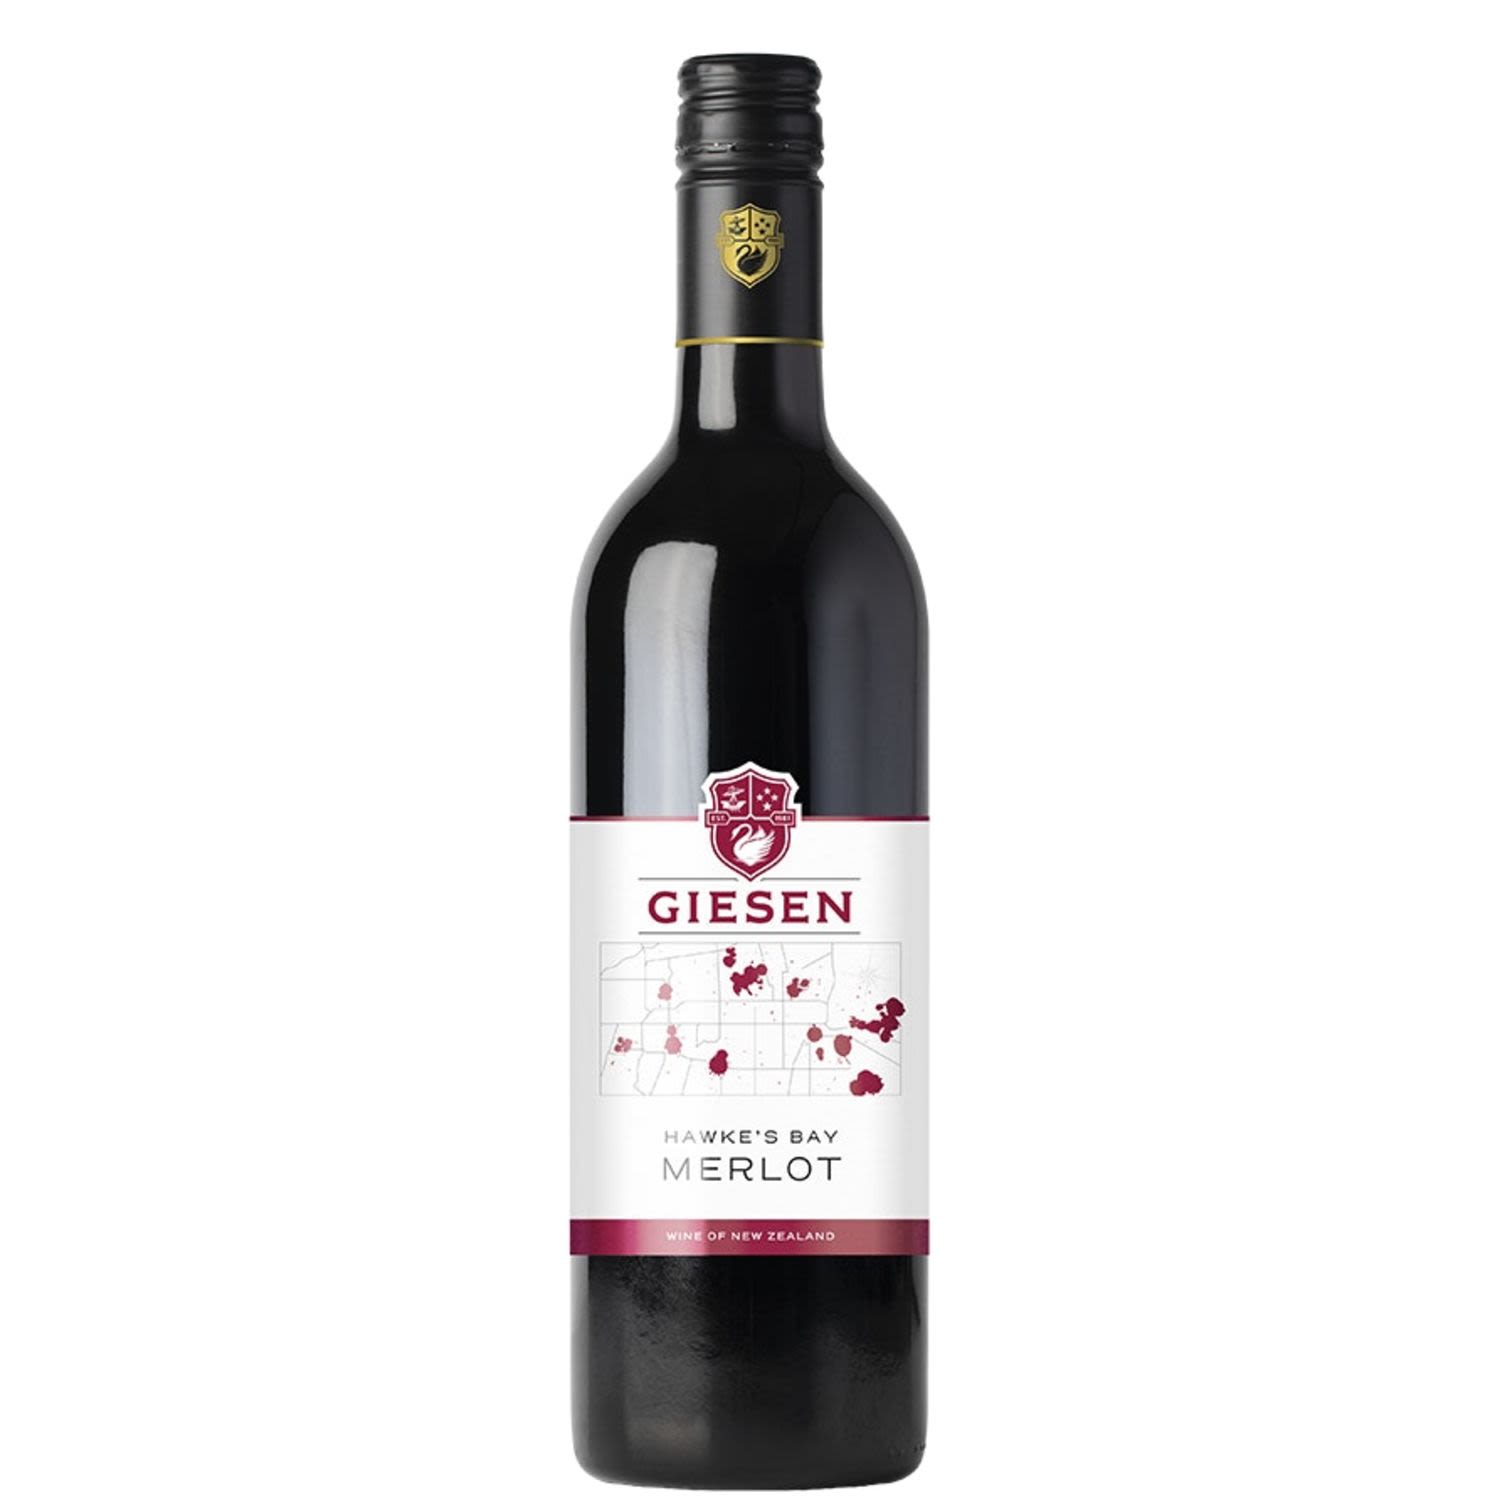 Giesen Merlot is structured, dry and smooth on the palate with dried herbs underpinning what is essentially a meduim bodied dark fruited and savoury experience. Well worth seeking out.<br /> <br />Alcohol Volume: 13.00%<br /><br />Pack Format: Bottle<br /><br />Standard Drinks: 7.7</br /><br />Pack Type: Bottle<br /><br />Country of Origin: New Zealand<br /><br />Region: Hawkes Bay<br /><br />Vintage: Vintages Vary<br />